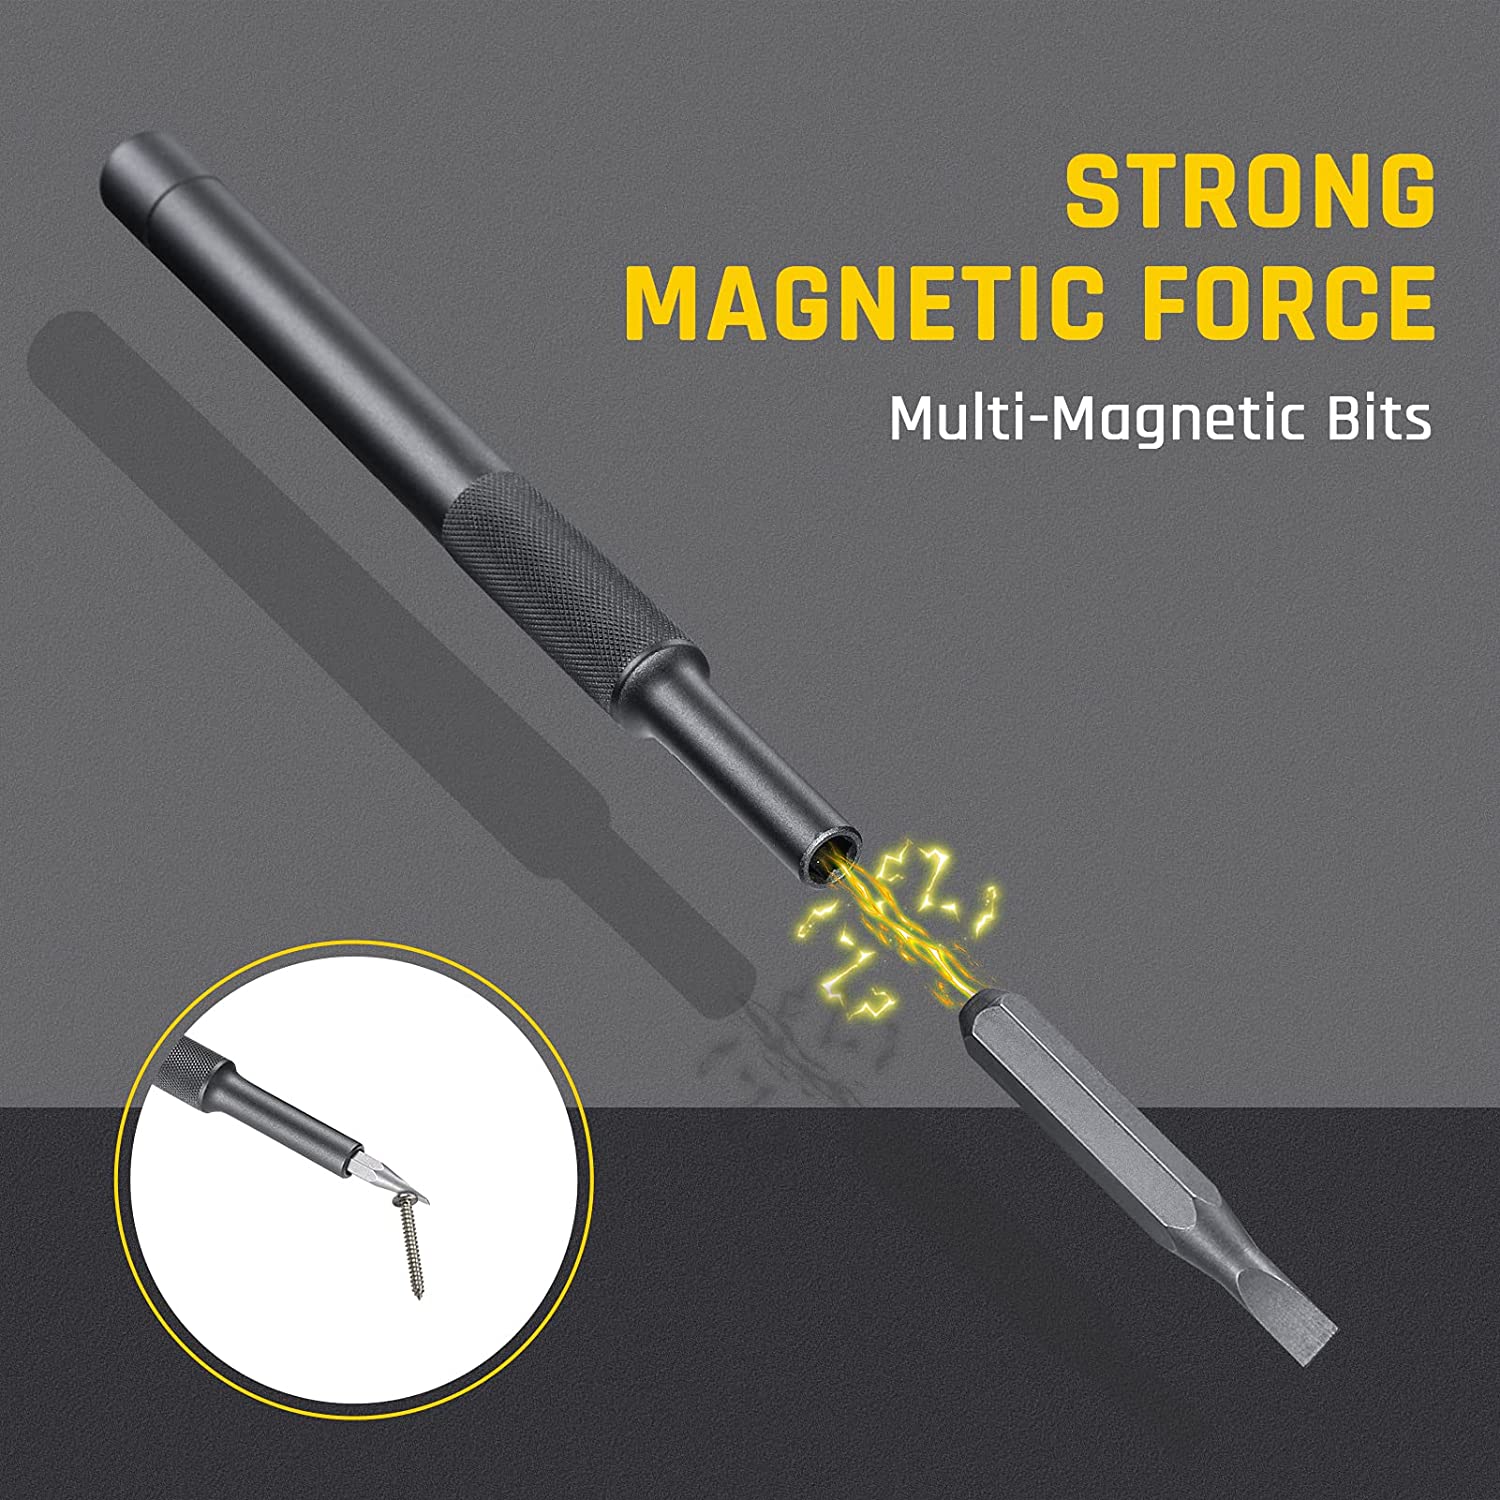  The head of the screwdriver shaft has also a built-in strong magnet, which makes it easy to install the bit, the magnetic screwdriver bits can easily suck up small screws.